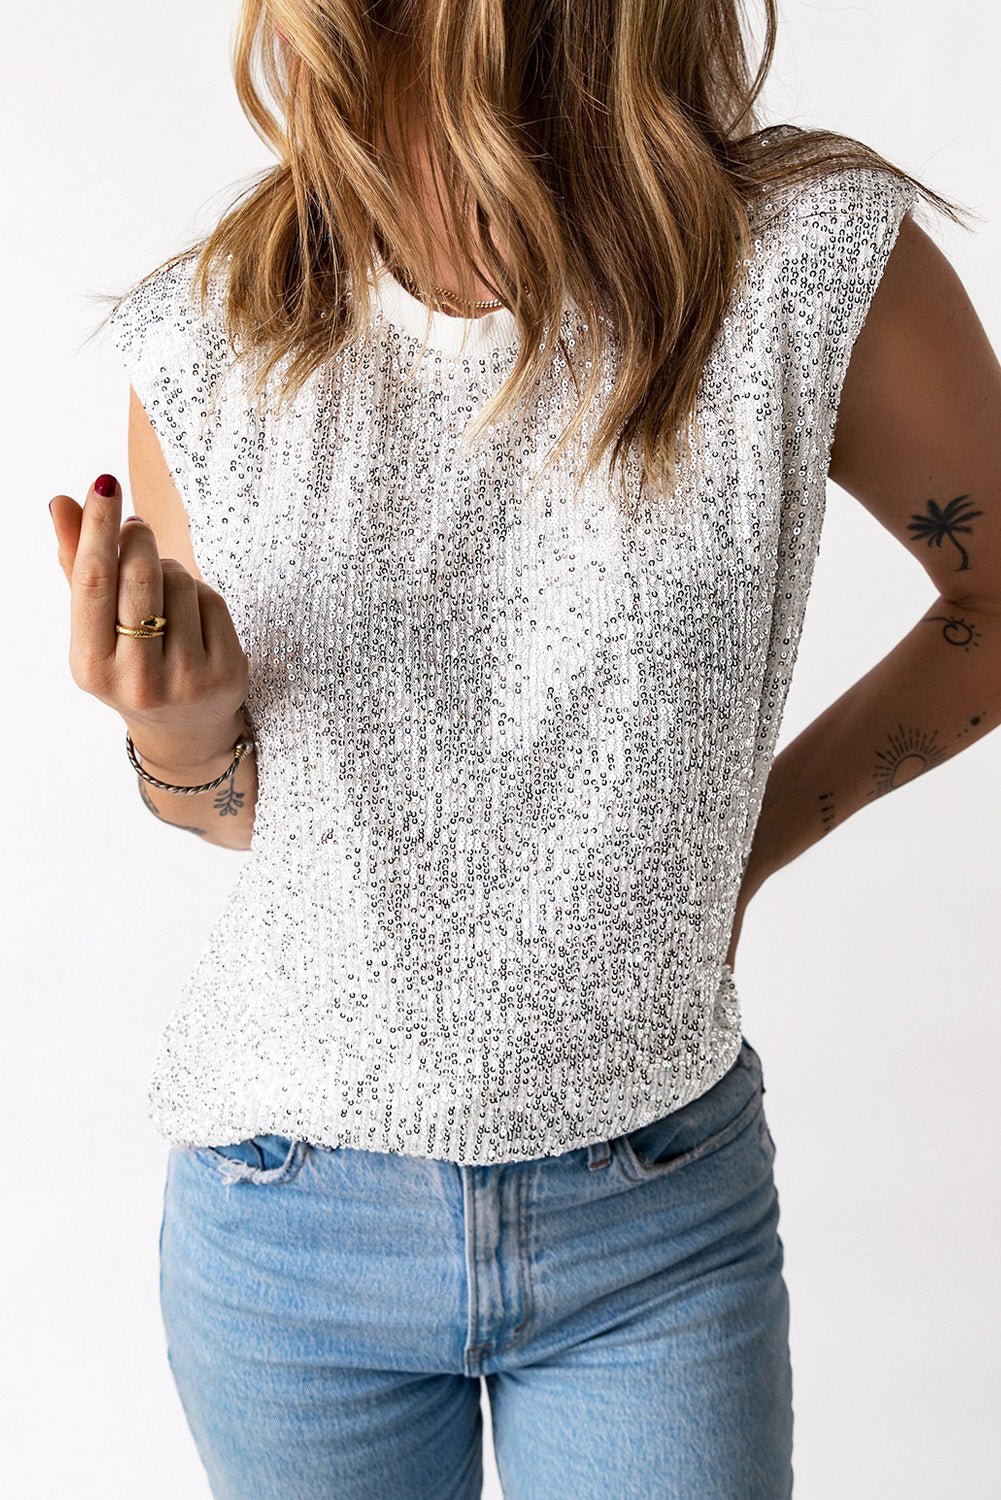 Sequin Round Neck Capped Sleeve Tank - OMG! Rose